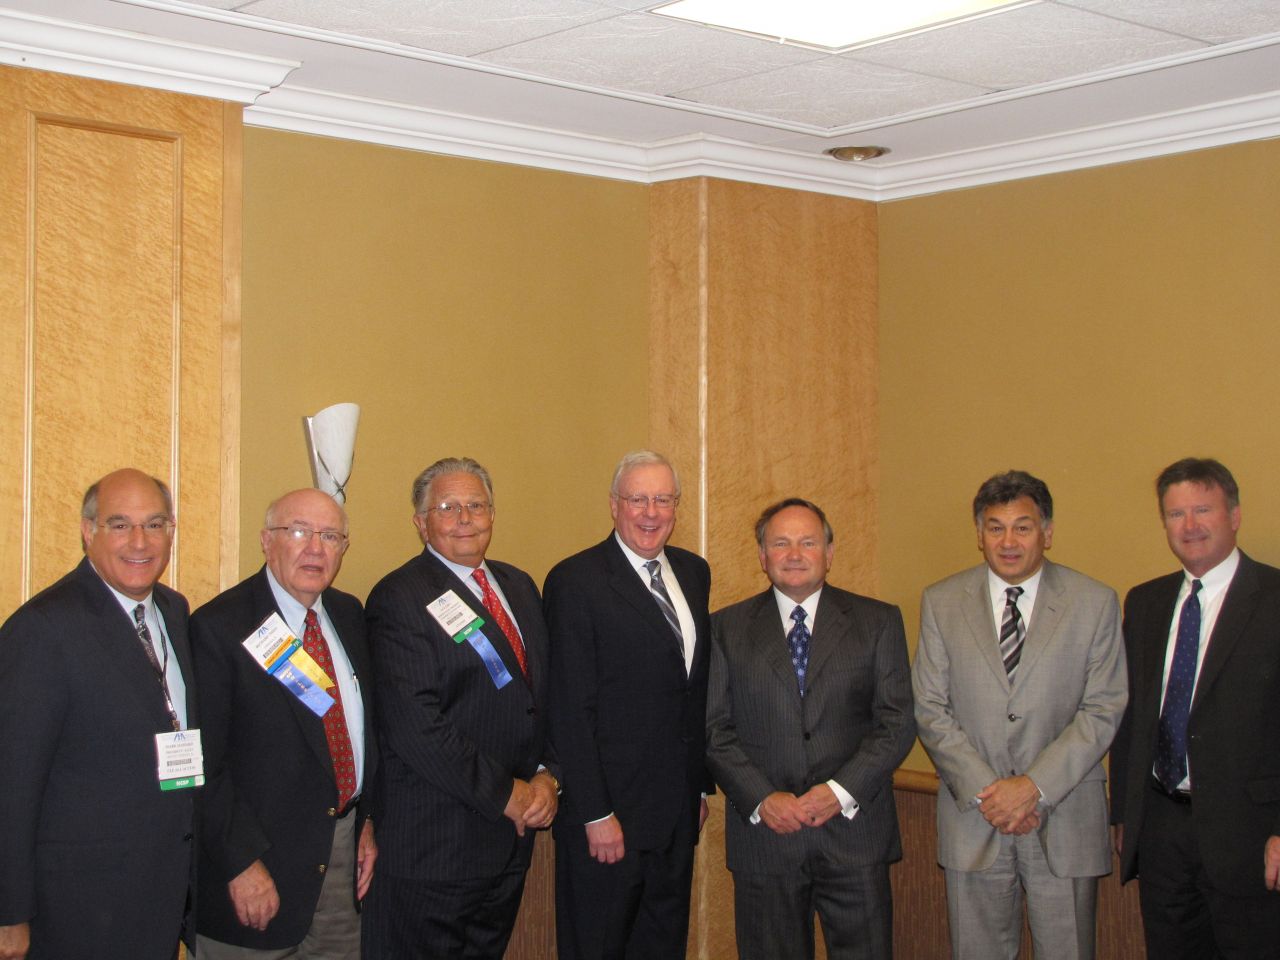 ISBA leaders with Illinois delegate Robert Clifford